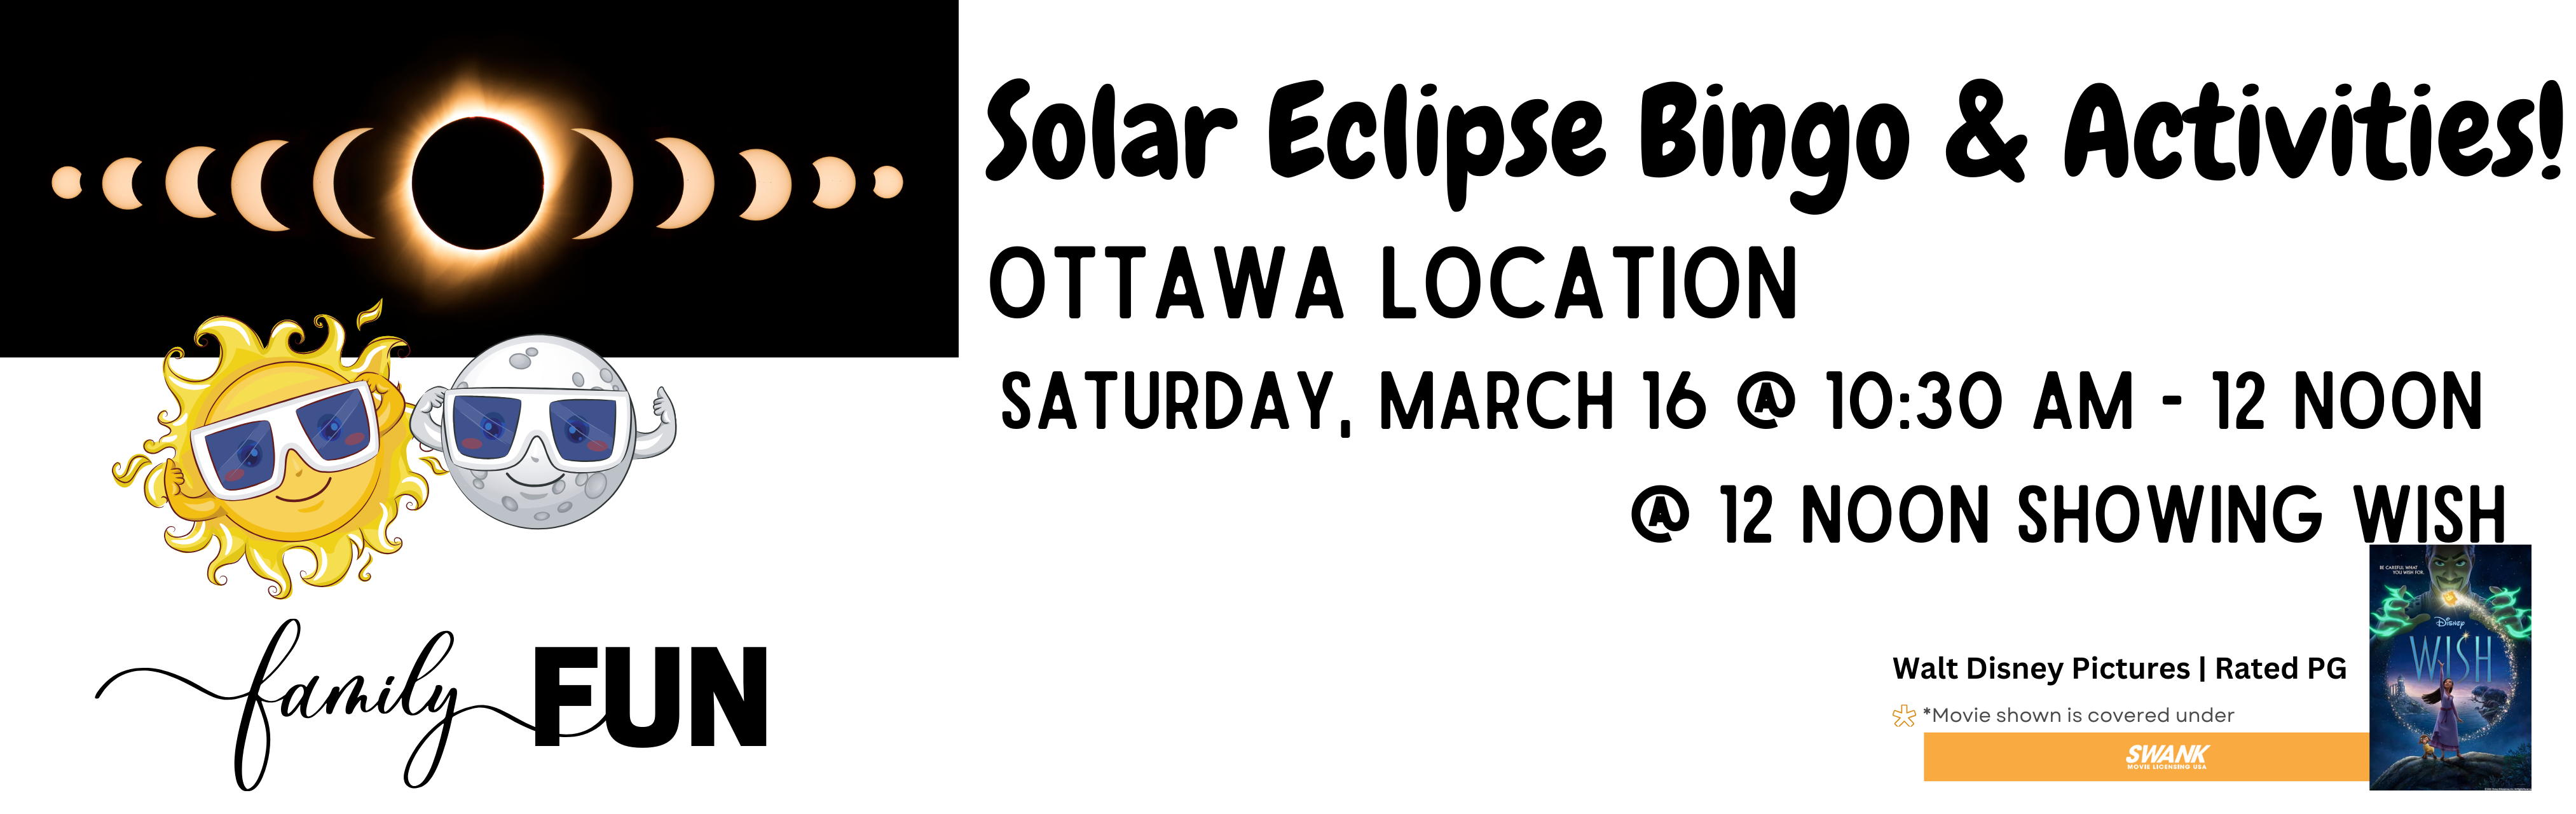 sun moon family fun Solar Eclipse Bingo & Activities Ottawa Location Saturday March 16 10:30 am - 12 noon, 12 noon showing Wish Walt Disney Pictures Rated PG Movies shown us covered under Swank Motion Pictures, Inc.